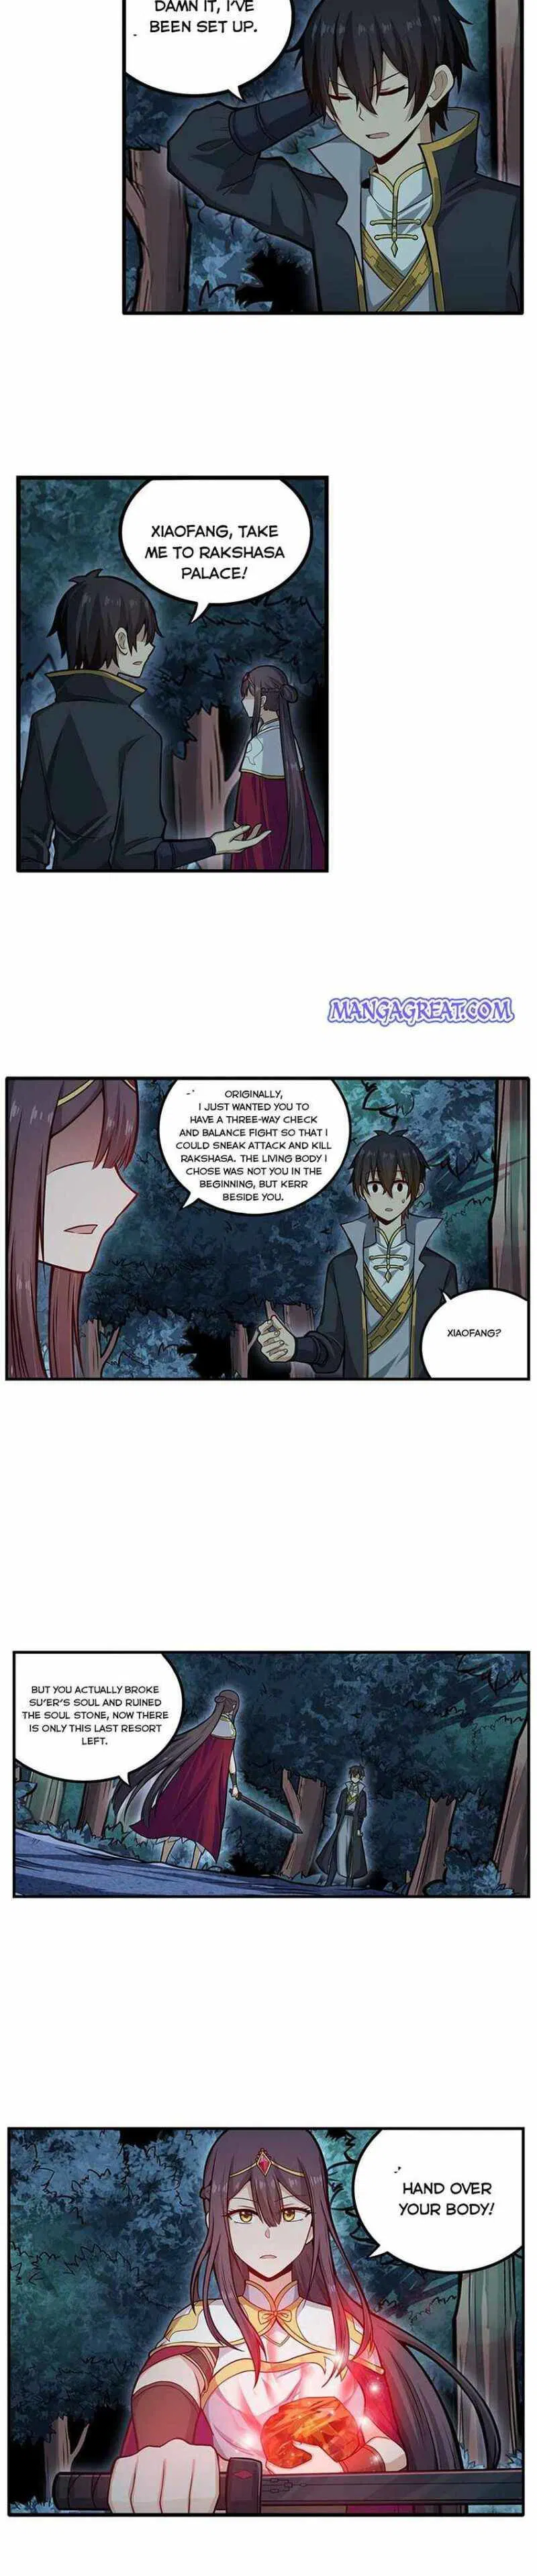 Infinite Apostles and Twelve War Girls Chapter 200 page 4